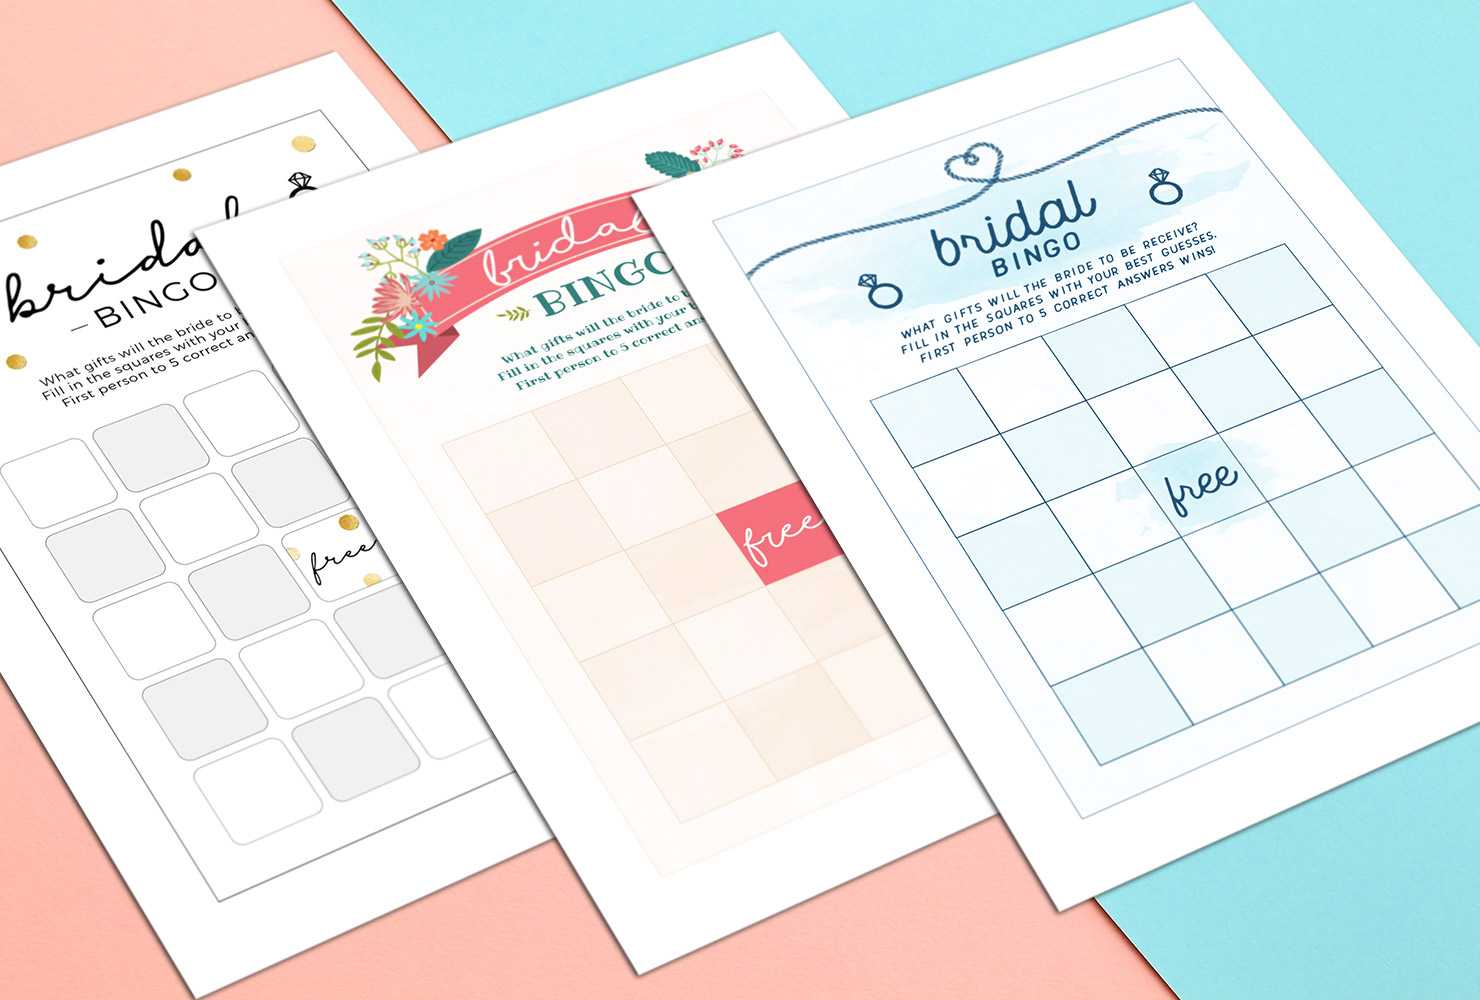 How To Play Bridal Shower Bingo (With Printables) | Shutterfly Pertaining To Blank Bridal Shower Bingo Template